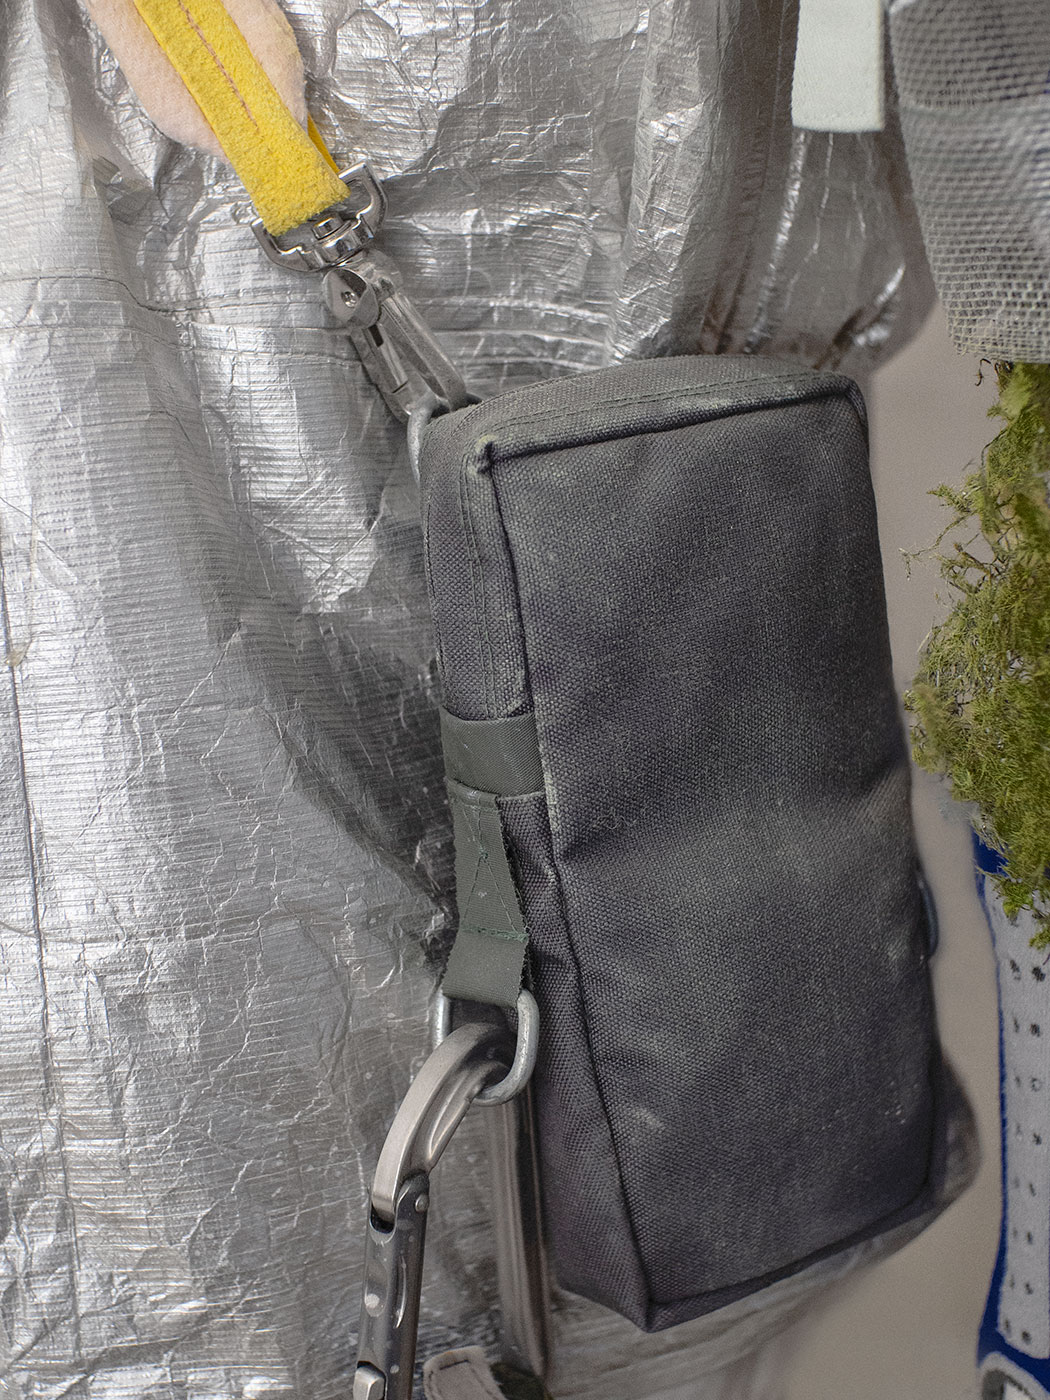 A green-grey shoulder bag with a 1:2 aspect ratio. The strap attached to the bag is rose-colored and has yellow leather ends. There are D-rings on the bag and an aluminum carabiner is attached to one of the rings.